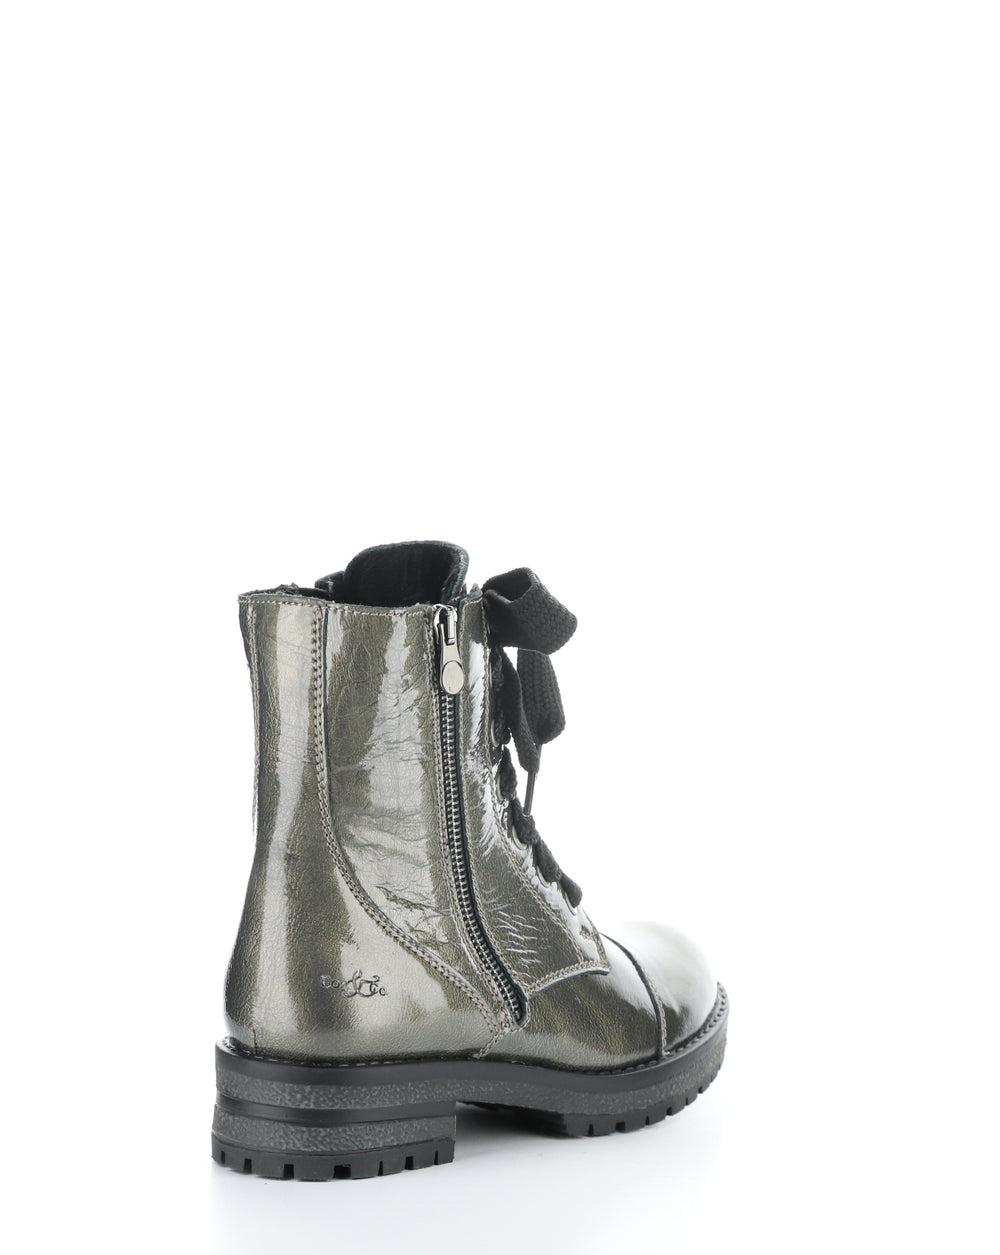 PAULIE PEWTER Round Toe Boots